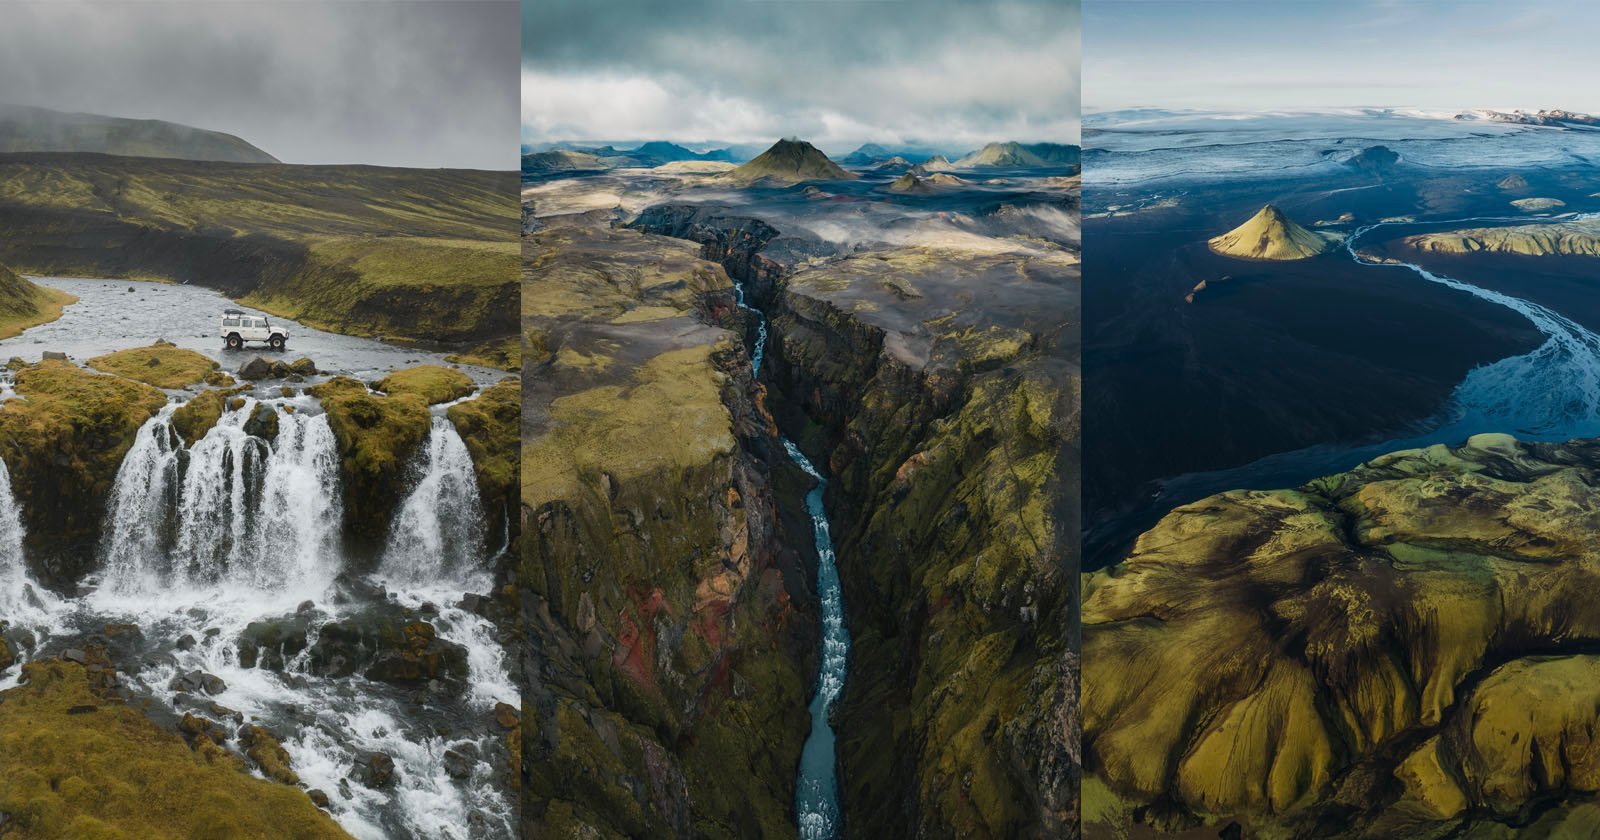 Drone Photographer Captures the Loneliness of the Icelandic Highlands